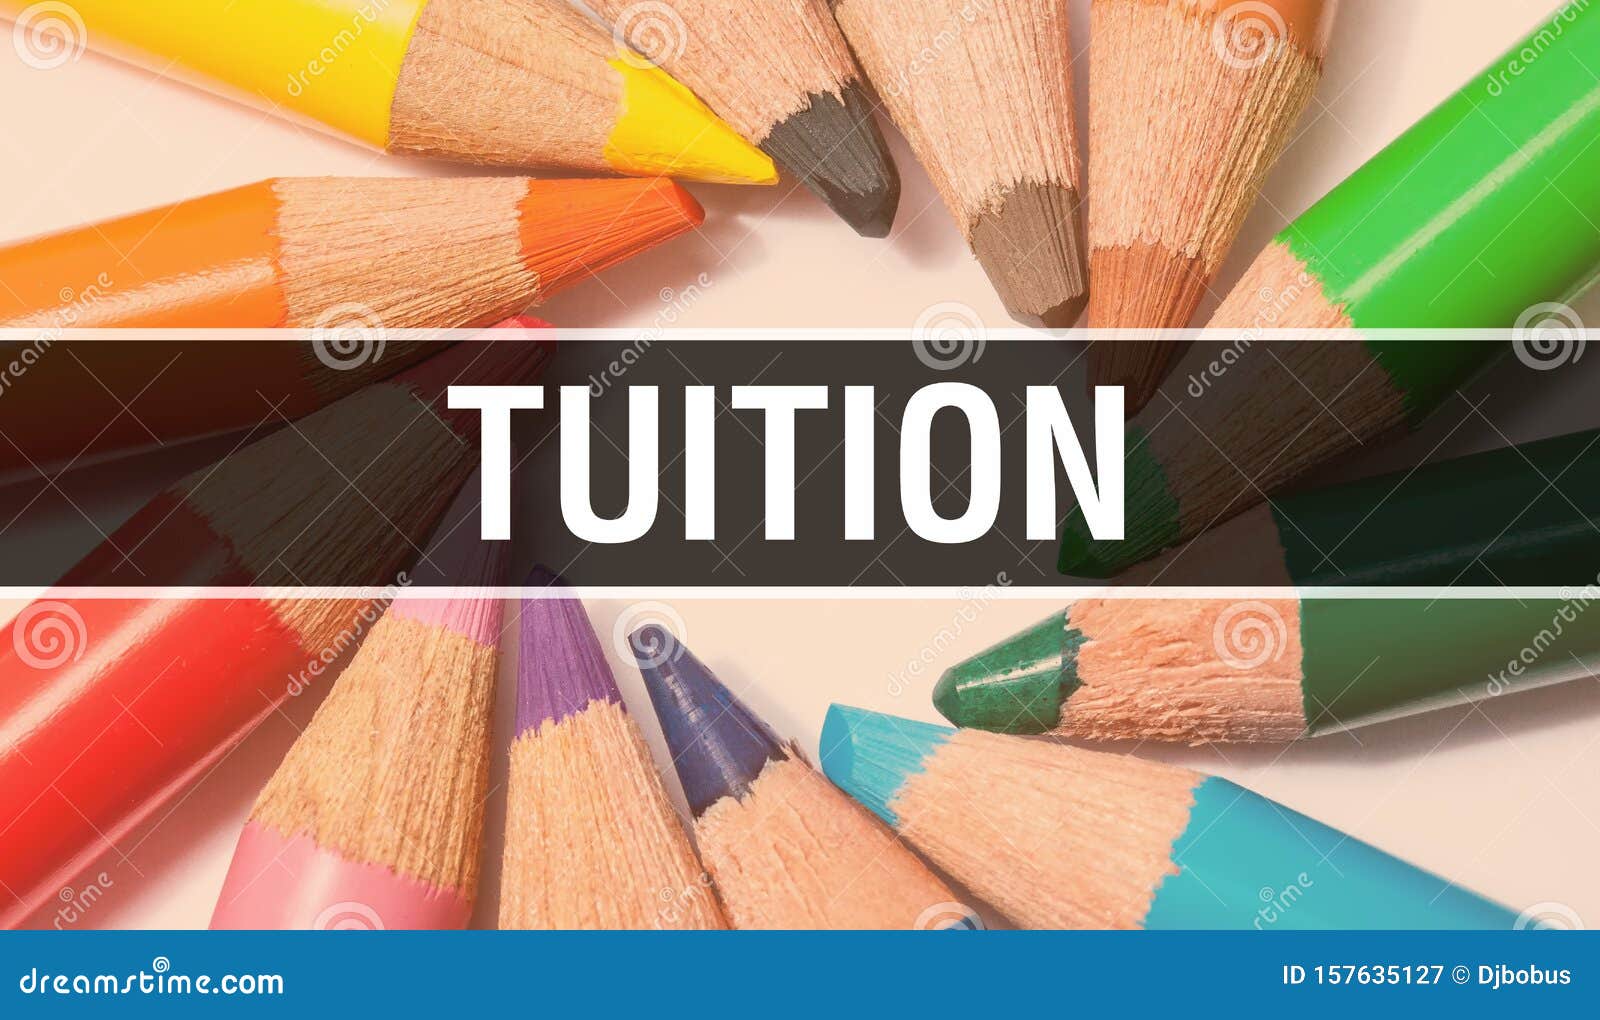 Tuition Concept Banner with Texture from Colorful Items of Education,  Science Objects and 1 September School Supplies. Tuition Stock Image -  Image of banner, color: 157635127